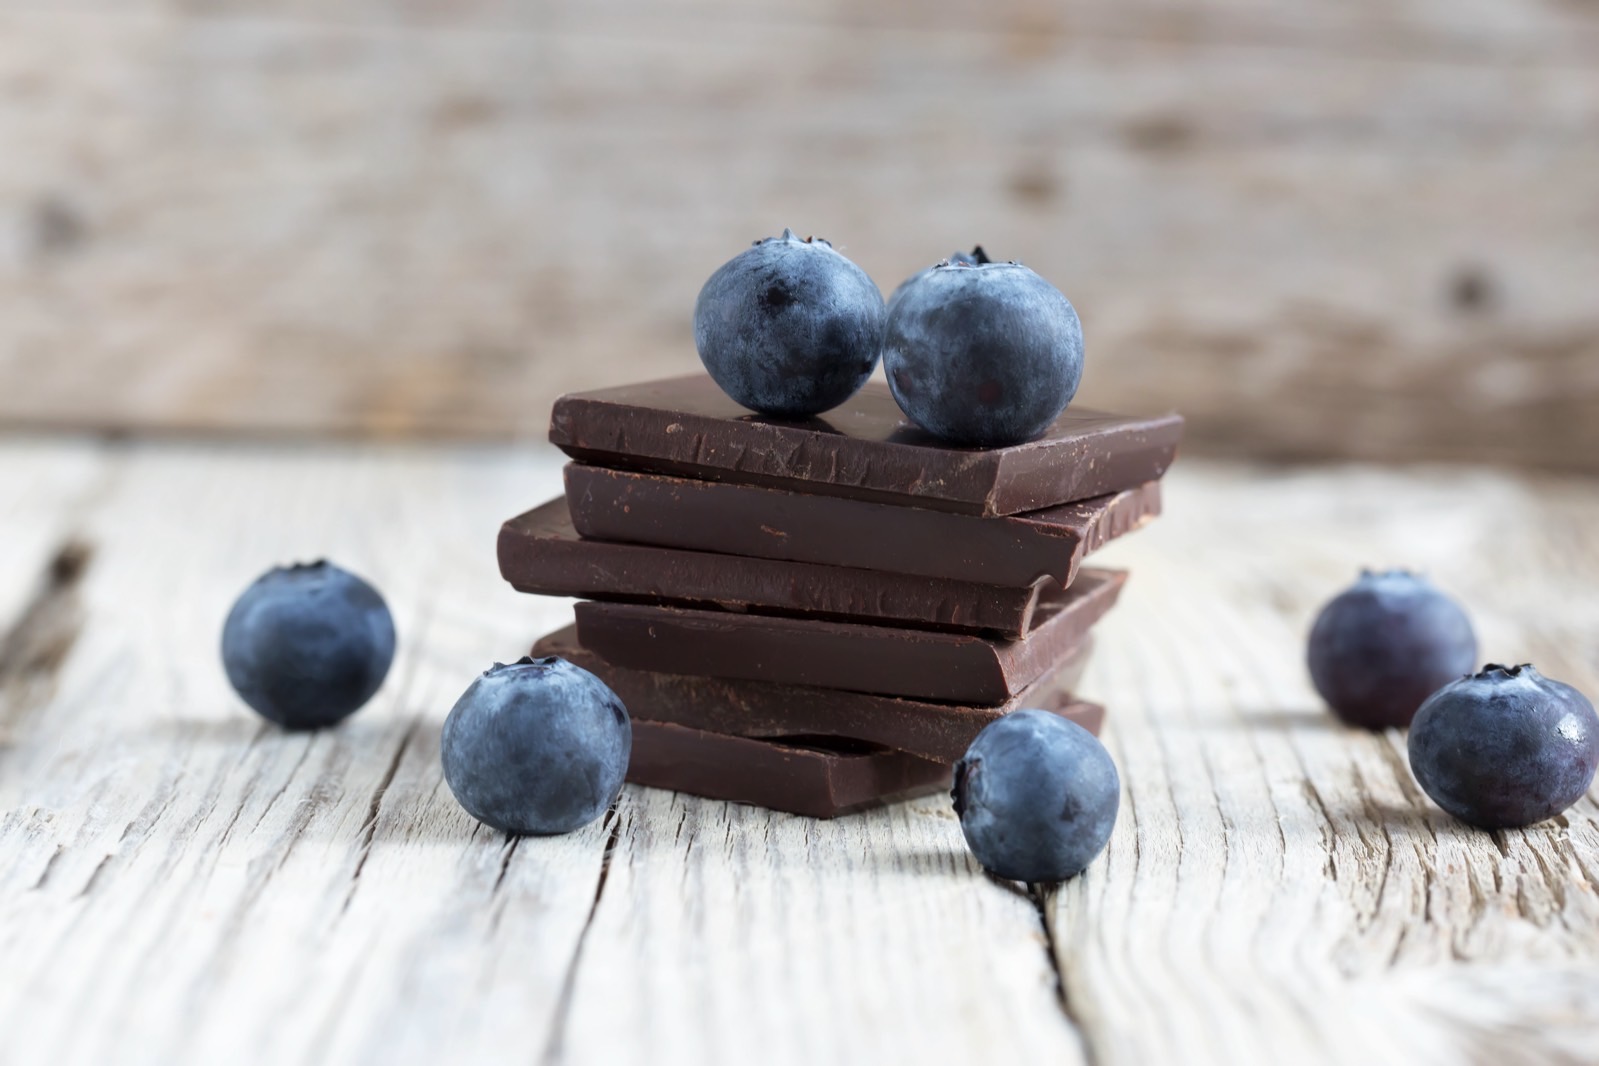 Dark chocolate stack and fresh organic blueberries on wooden table.